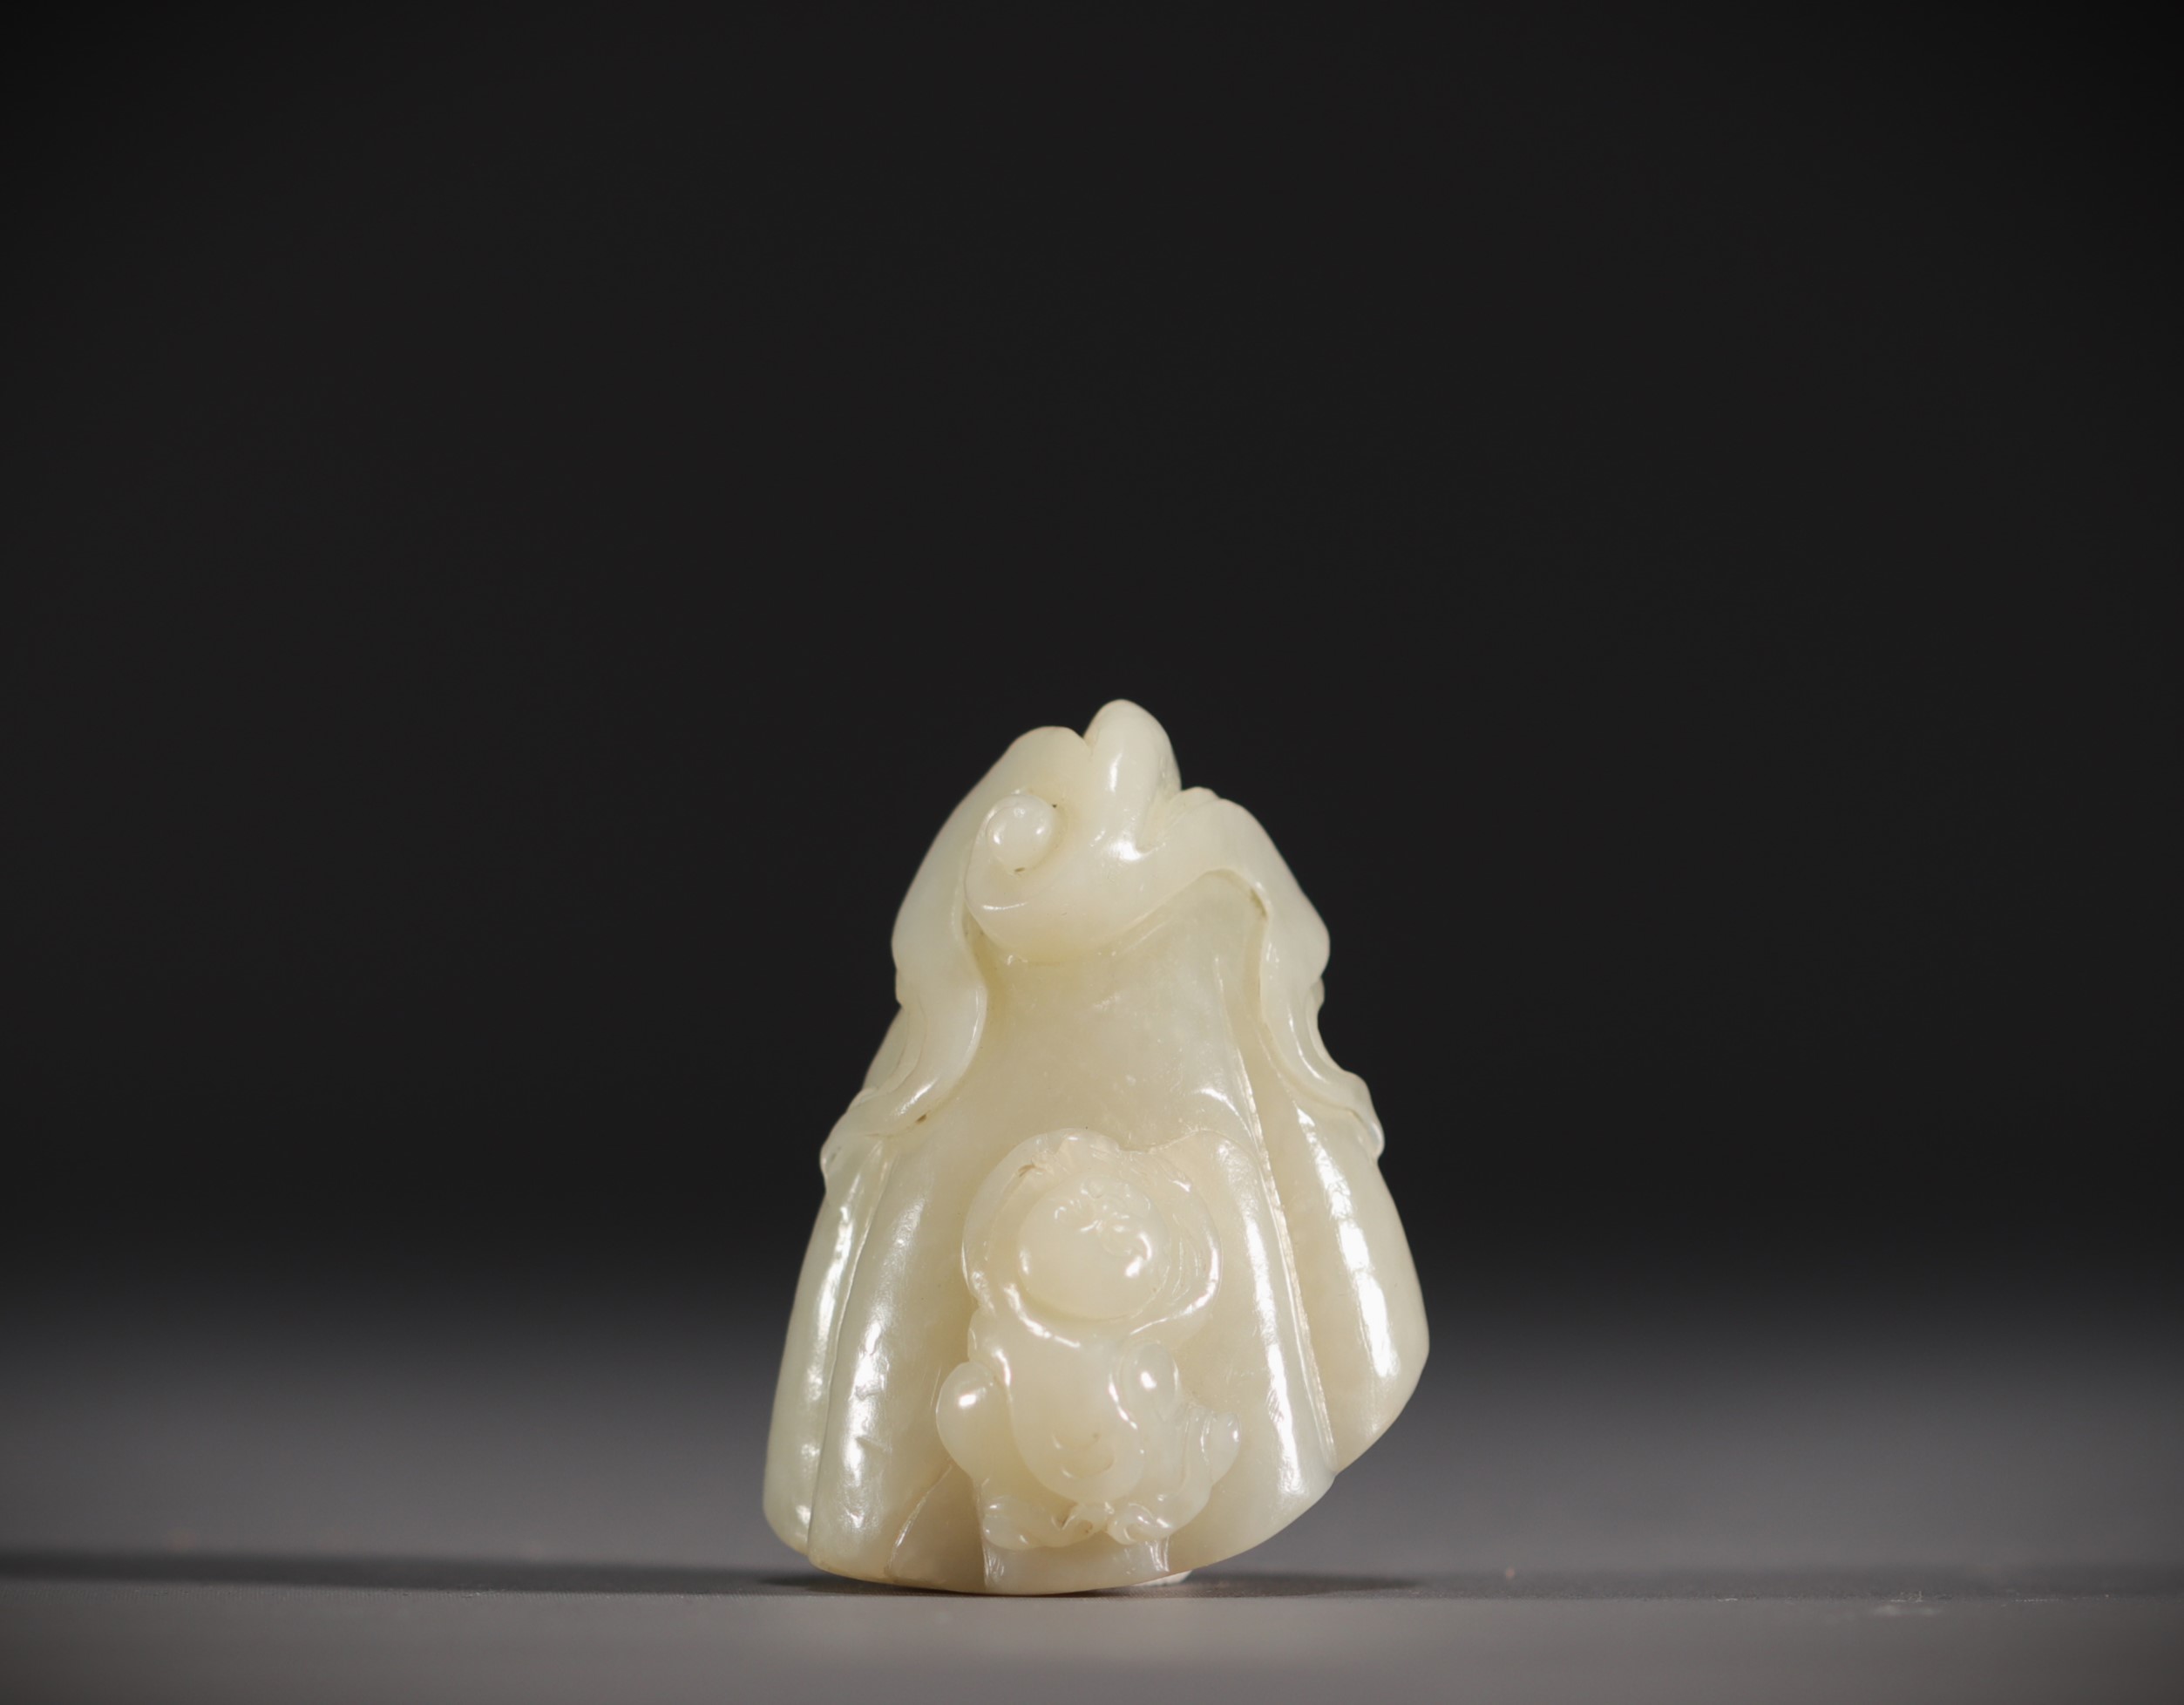 China - White jade pendant in the shape of a fruit surmounted by a young child.